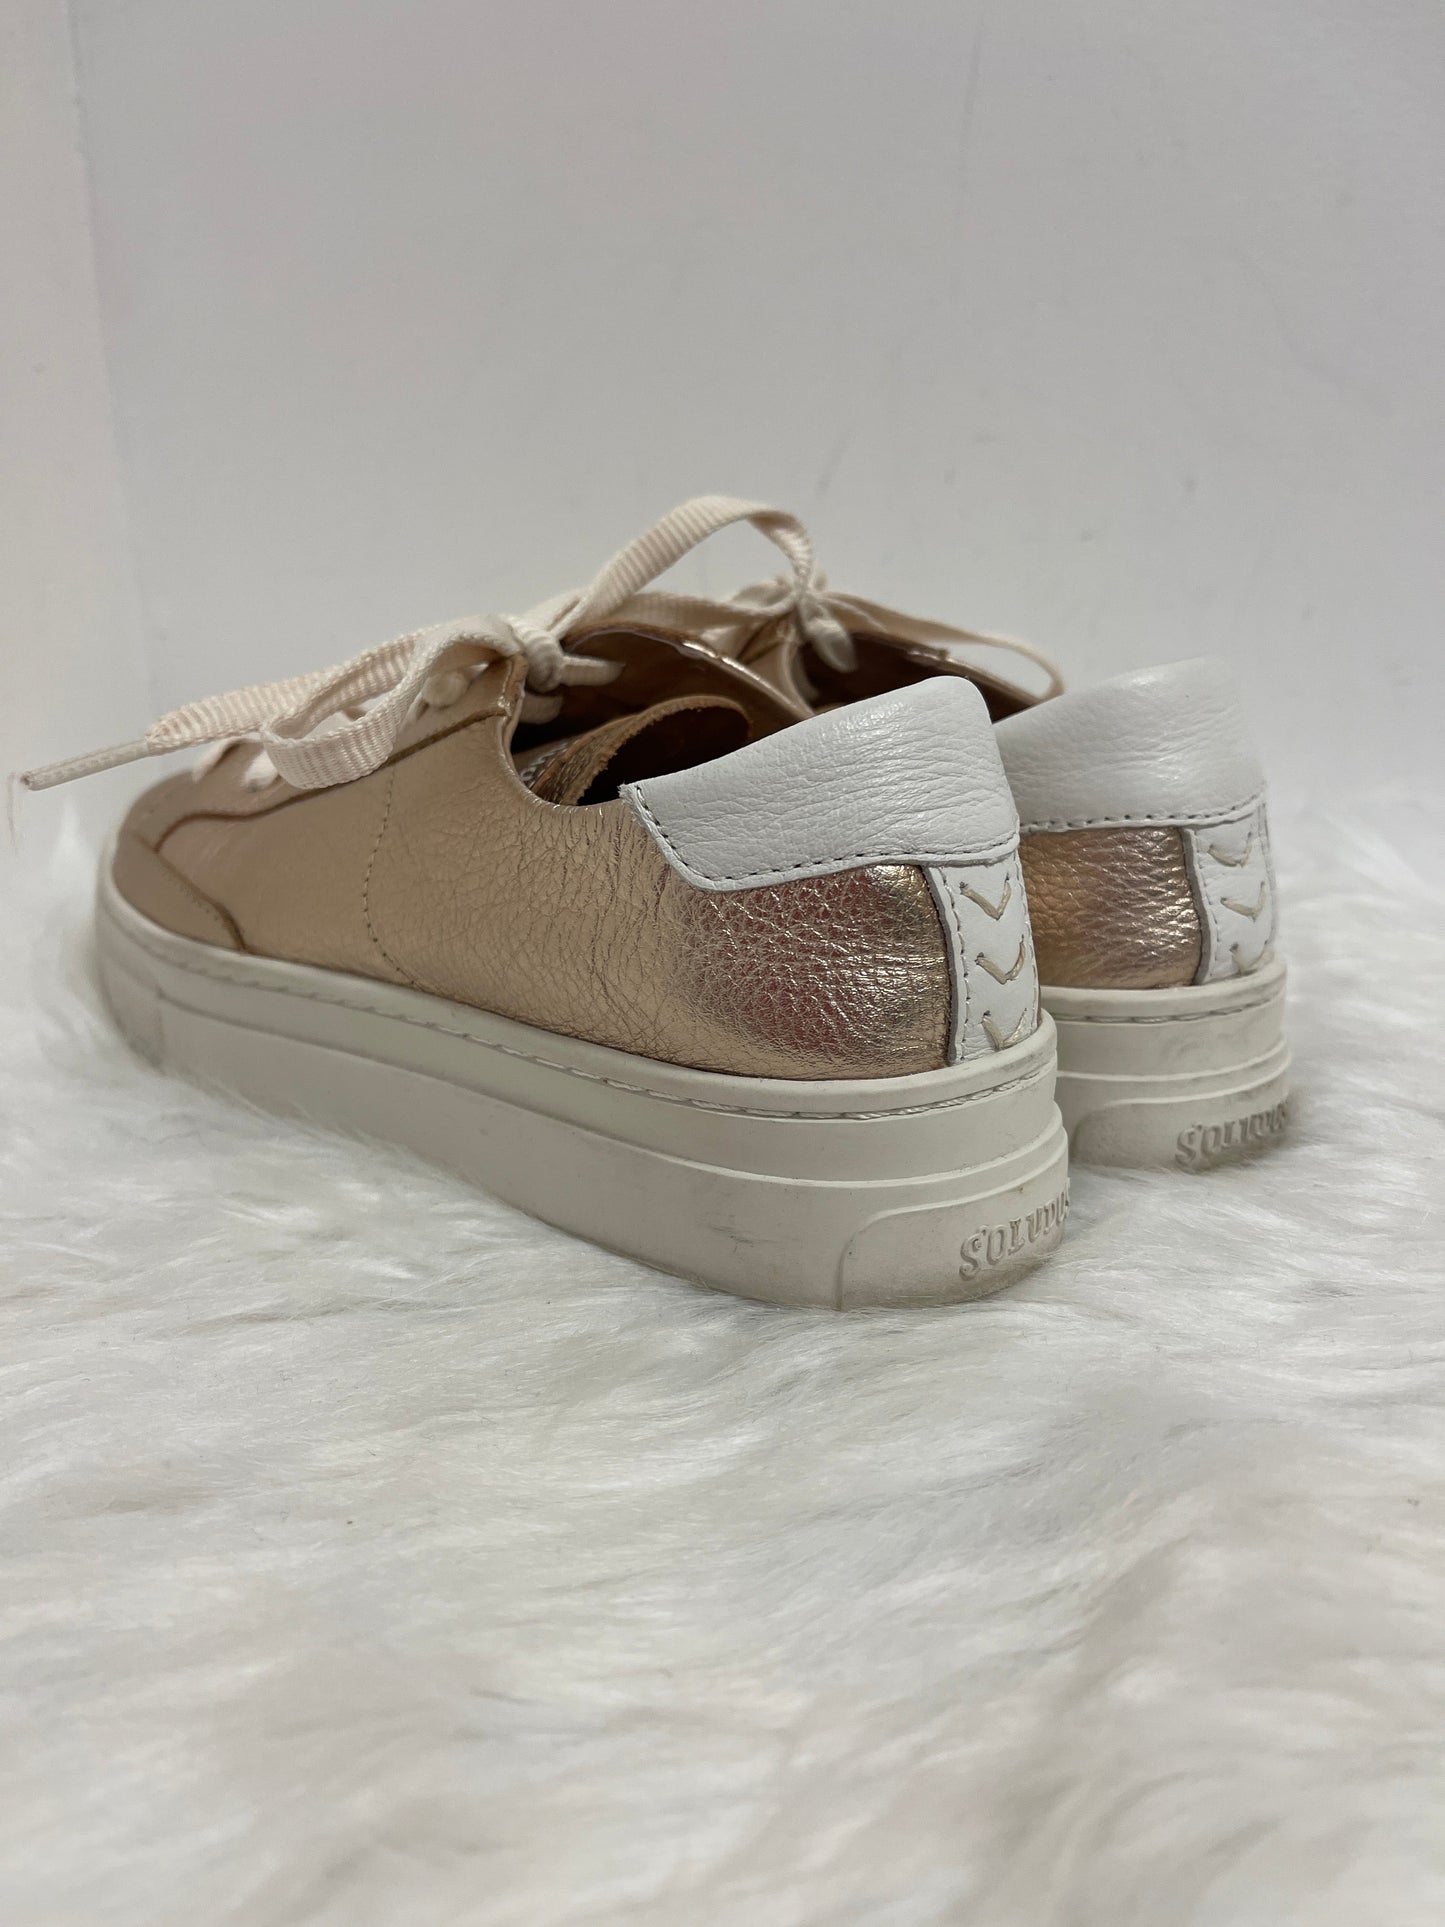 Gold Shoes Sneakers Soludos, Size 8